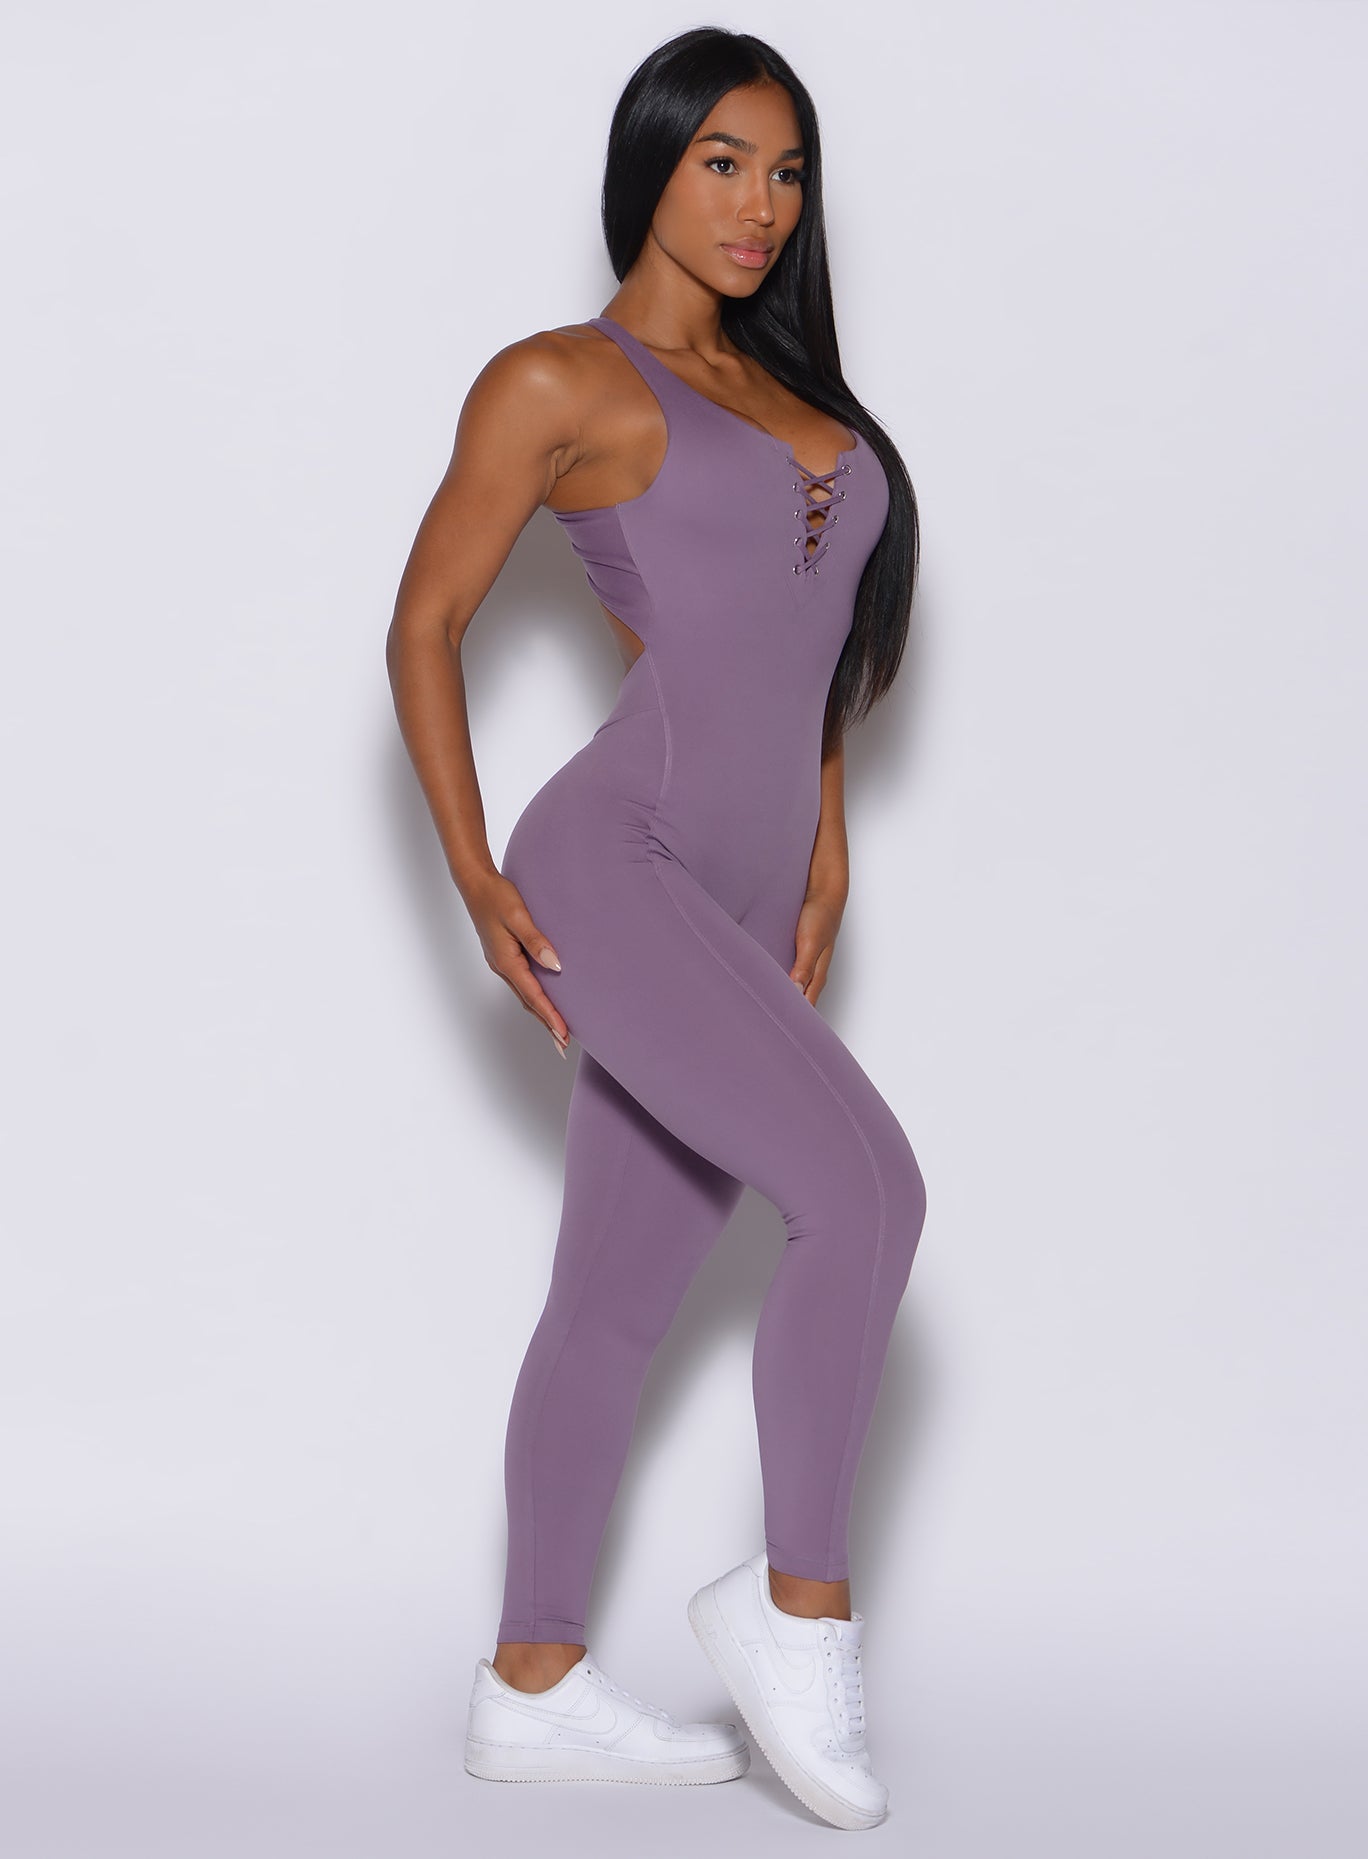 Right side profile view of a model wearing our laced bodysuit in Violet Frost color